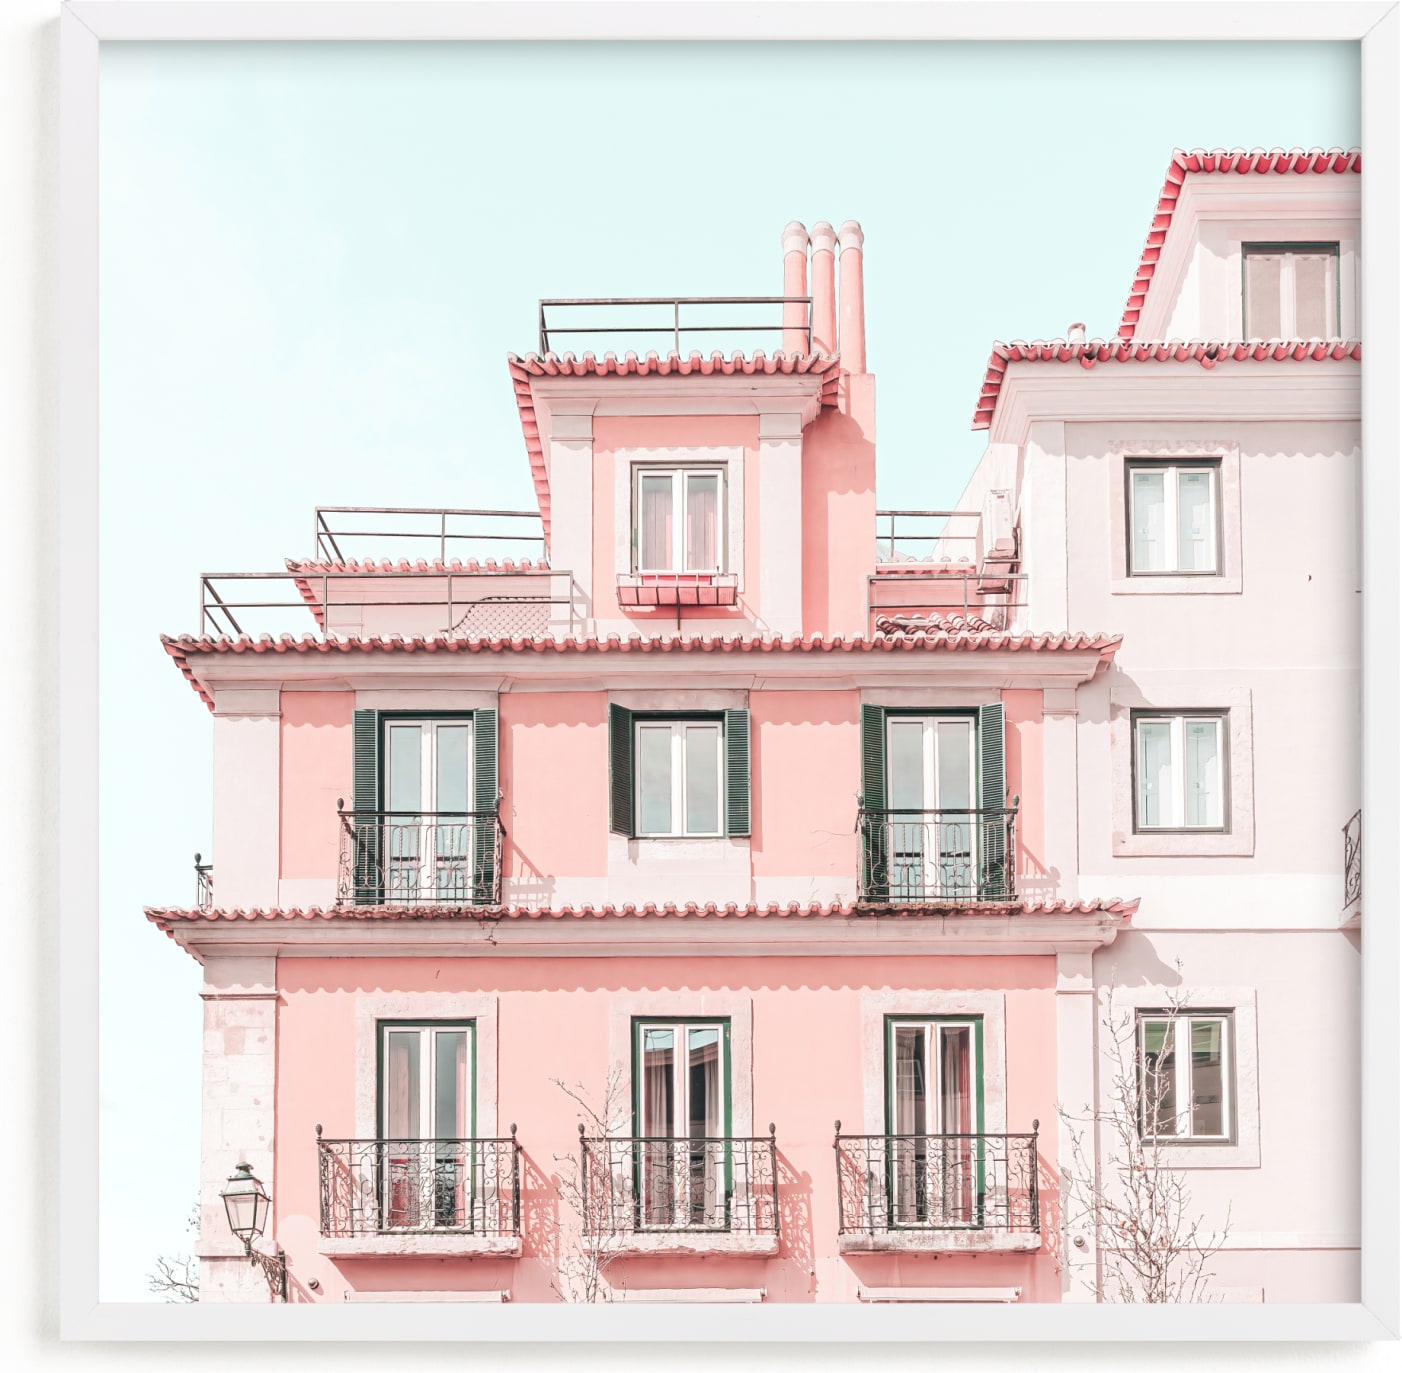 This is a blue art by Heather Loriece called Pastel Pink House.